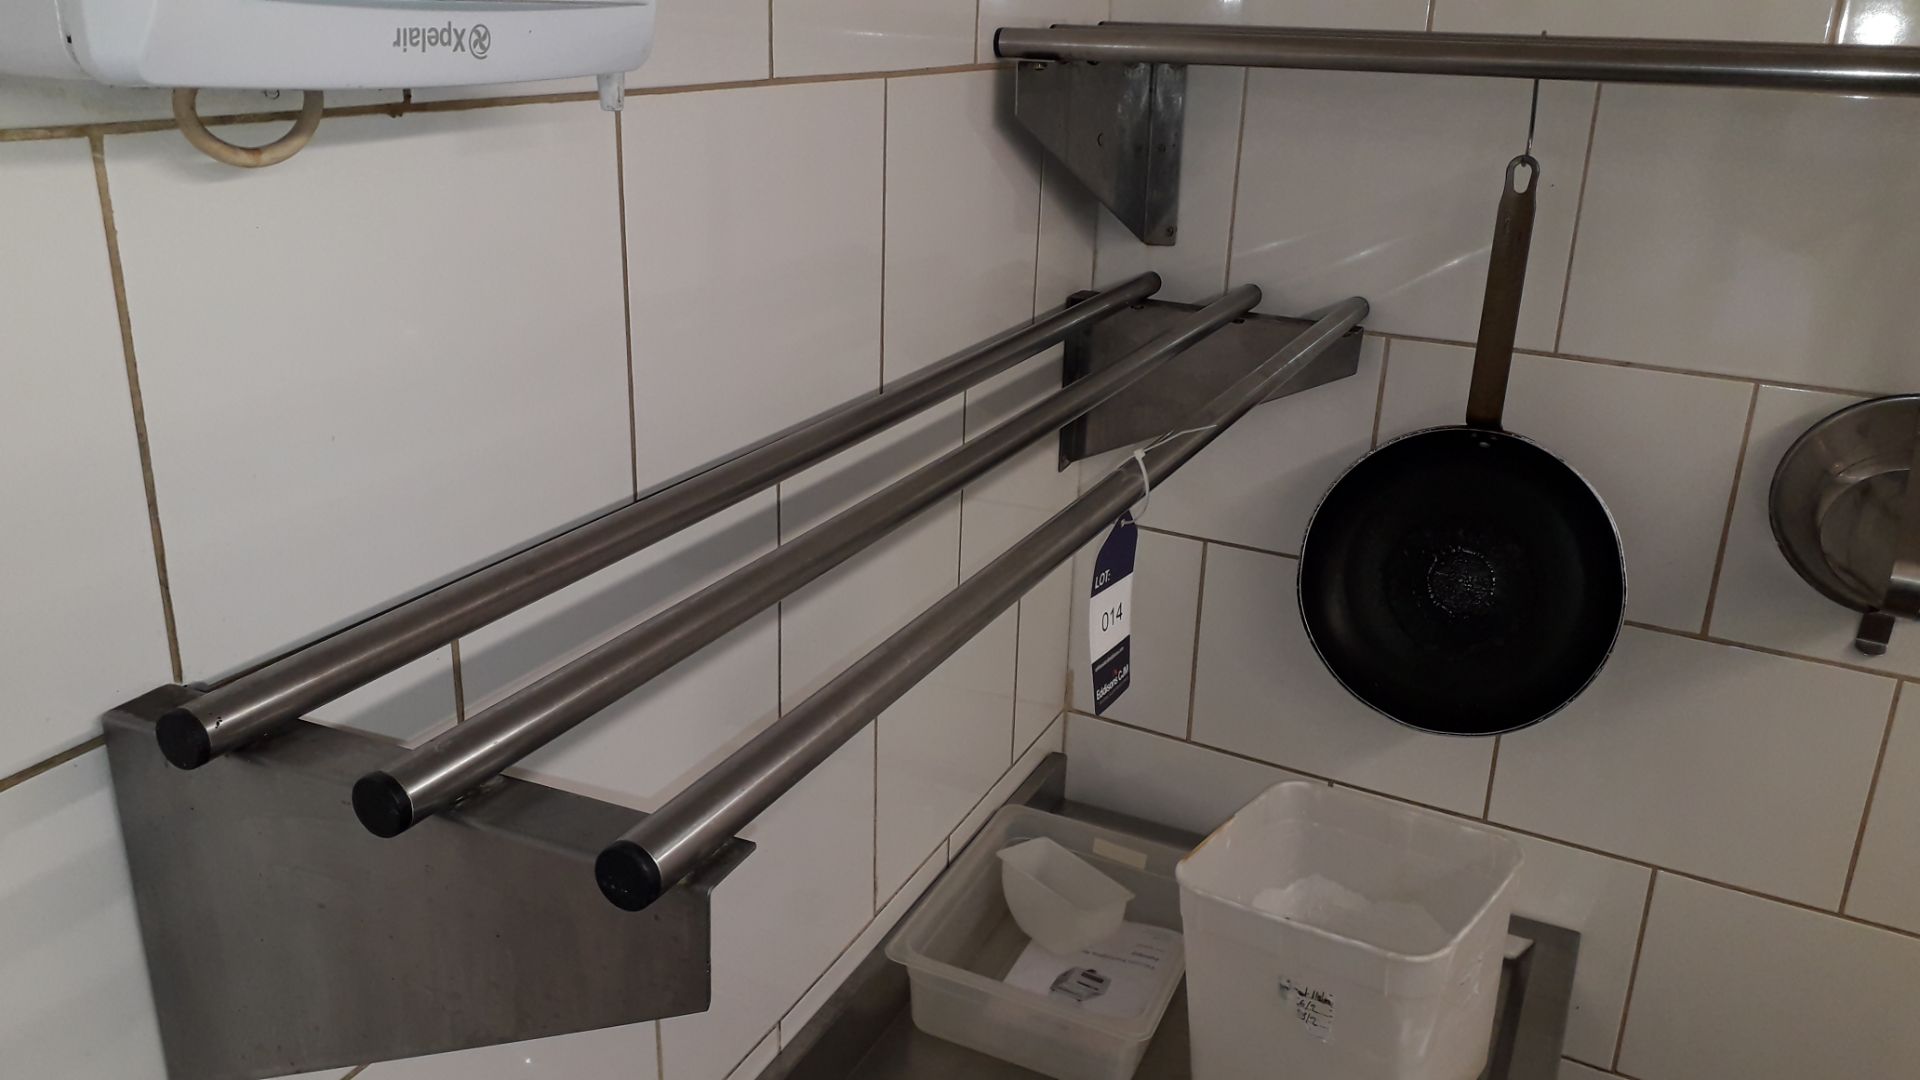 2 x Stainless Steel Wall Mounted Wide Piped Shelves 1200mm - Image 2 of 2